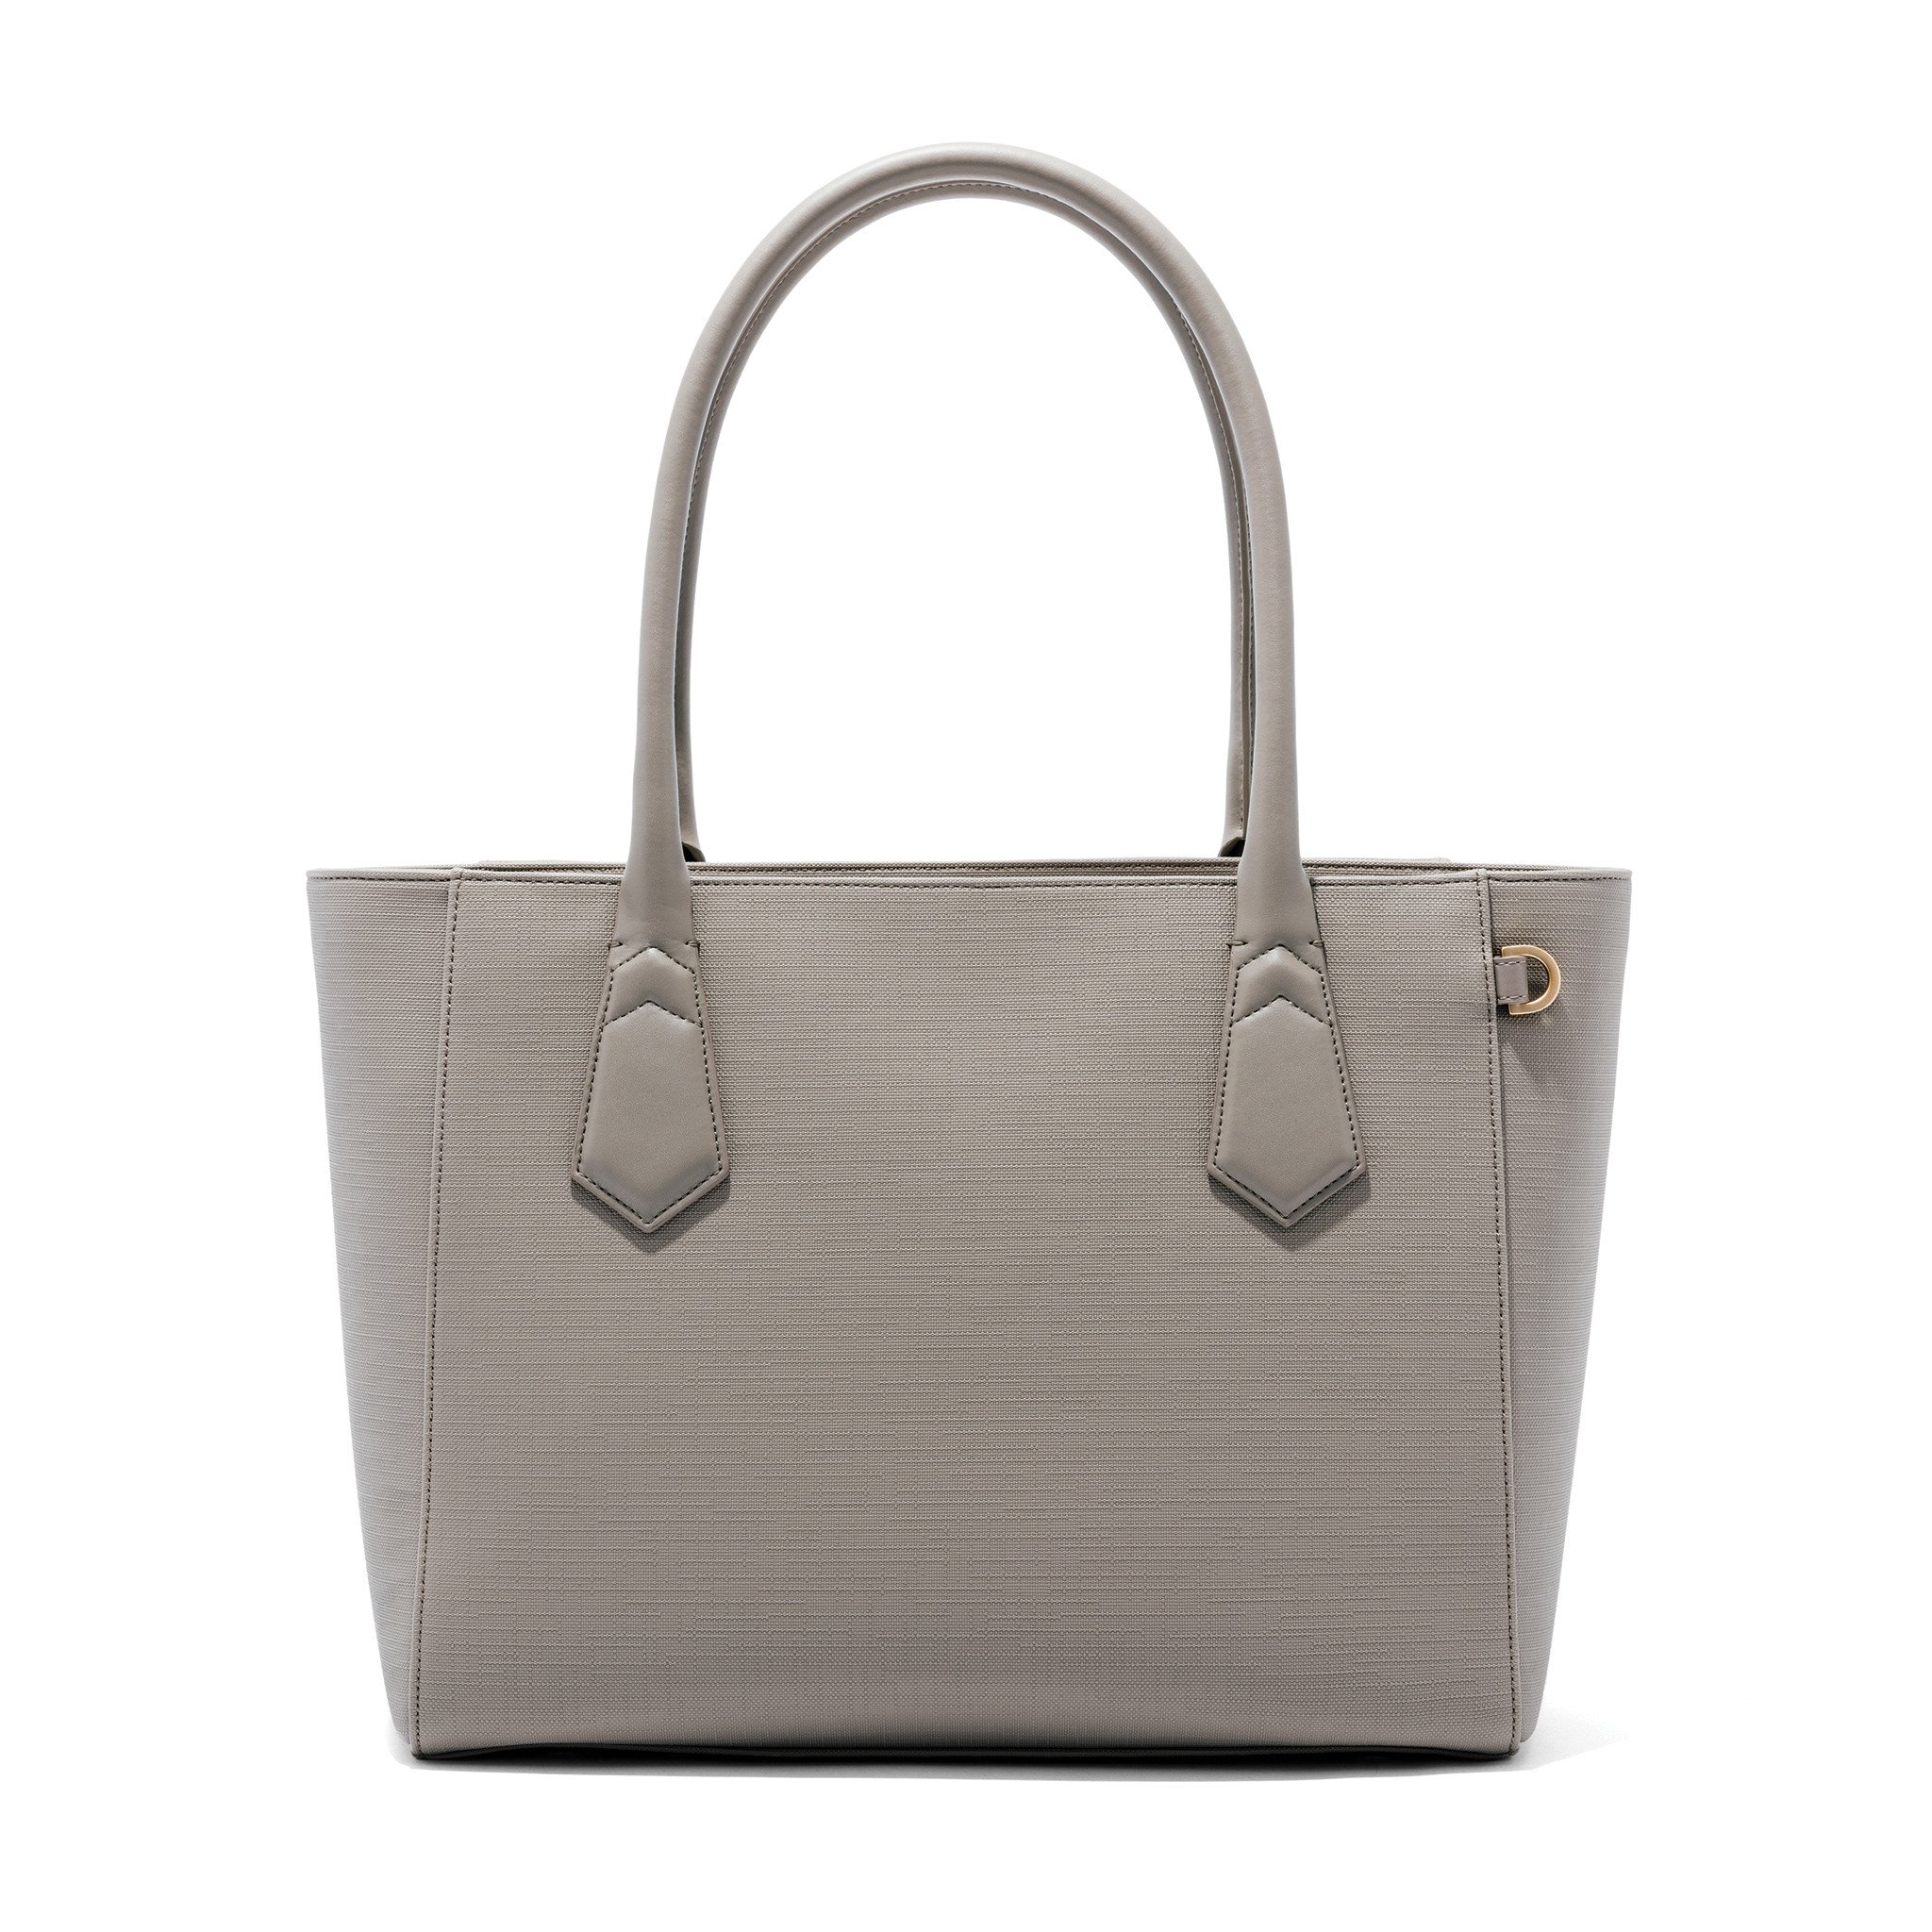 Dagne Dover Classic Tote Review - Best Work Bag for Women